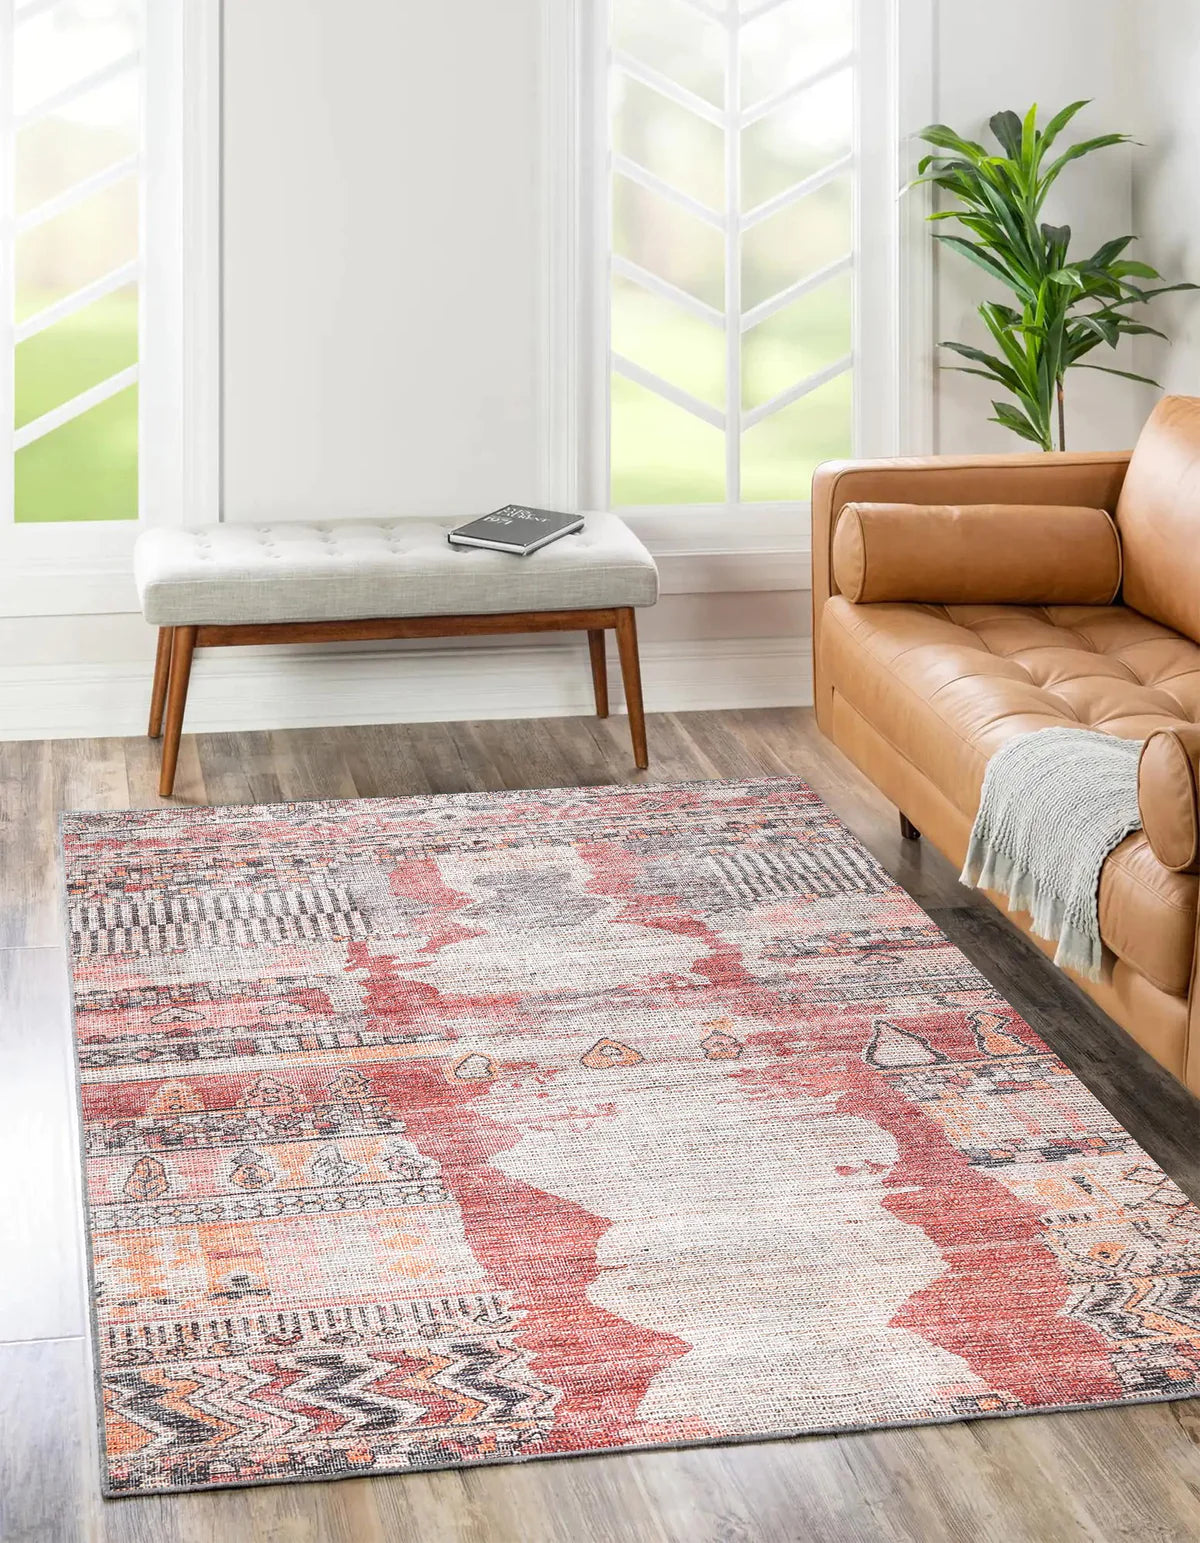 Affordable Elegance: Cheap Rugs